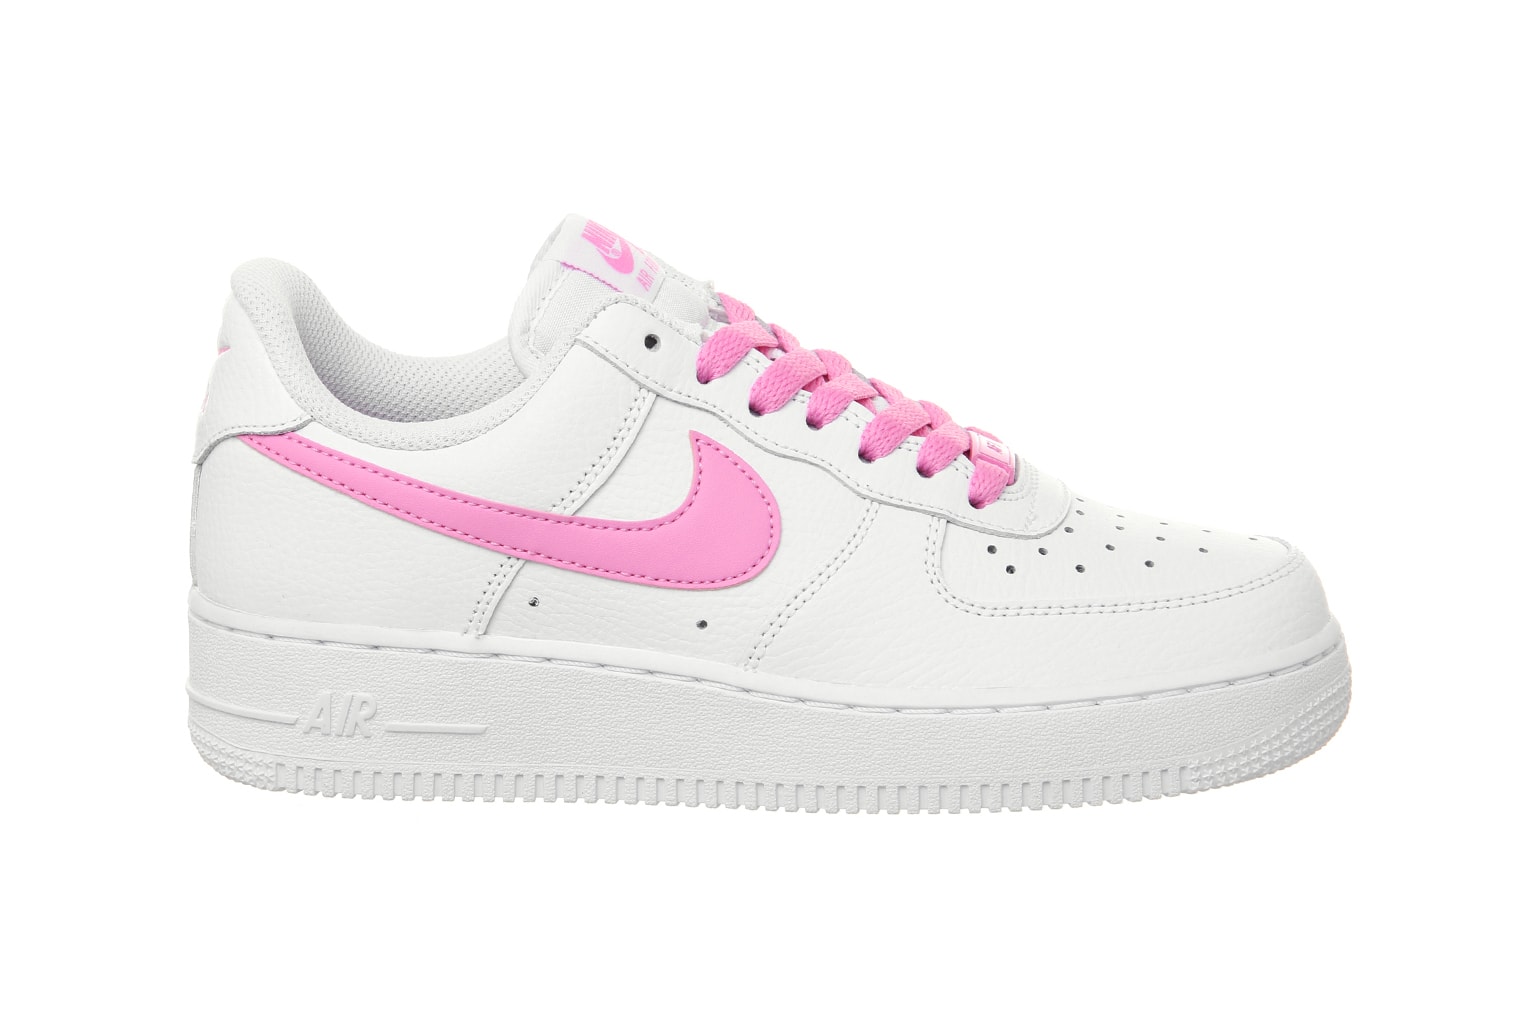 Nike Air Force 1 07 Psychic Pink White Sneakers Trainers